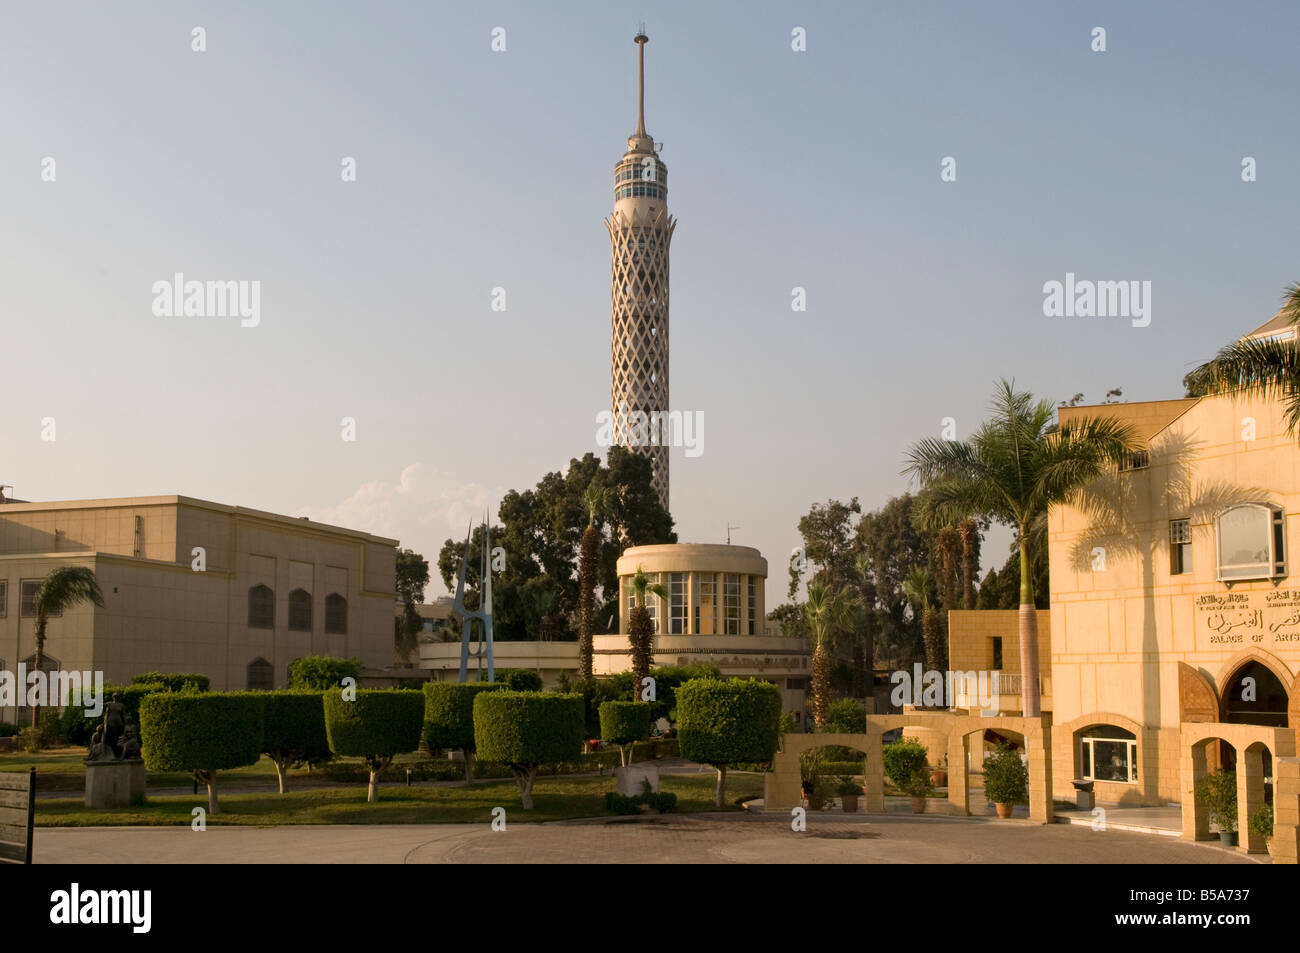 View of the Cairo Tower and the Palace of Arts at the Cairo Opera House grounds located in Zamalek district on the Nile island of Gezira Cairo Egypt Stock Photo